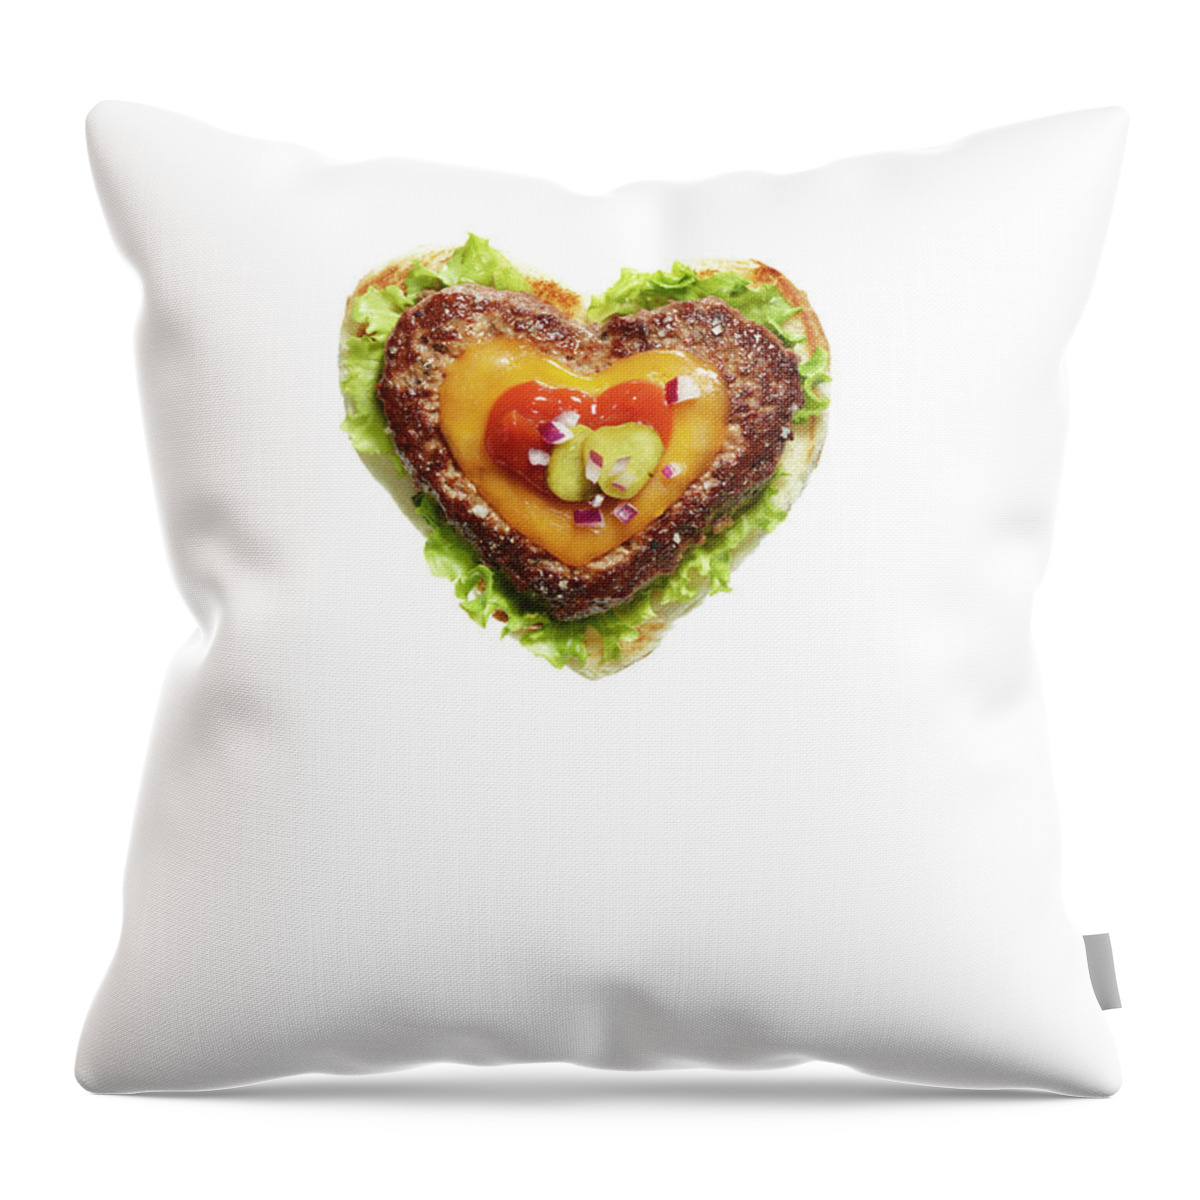 Cheese Throw Pillow featuring the photograph Heart Shaped Cheese Burger On White by Maren Caruso